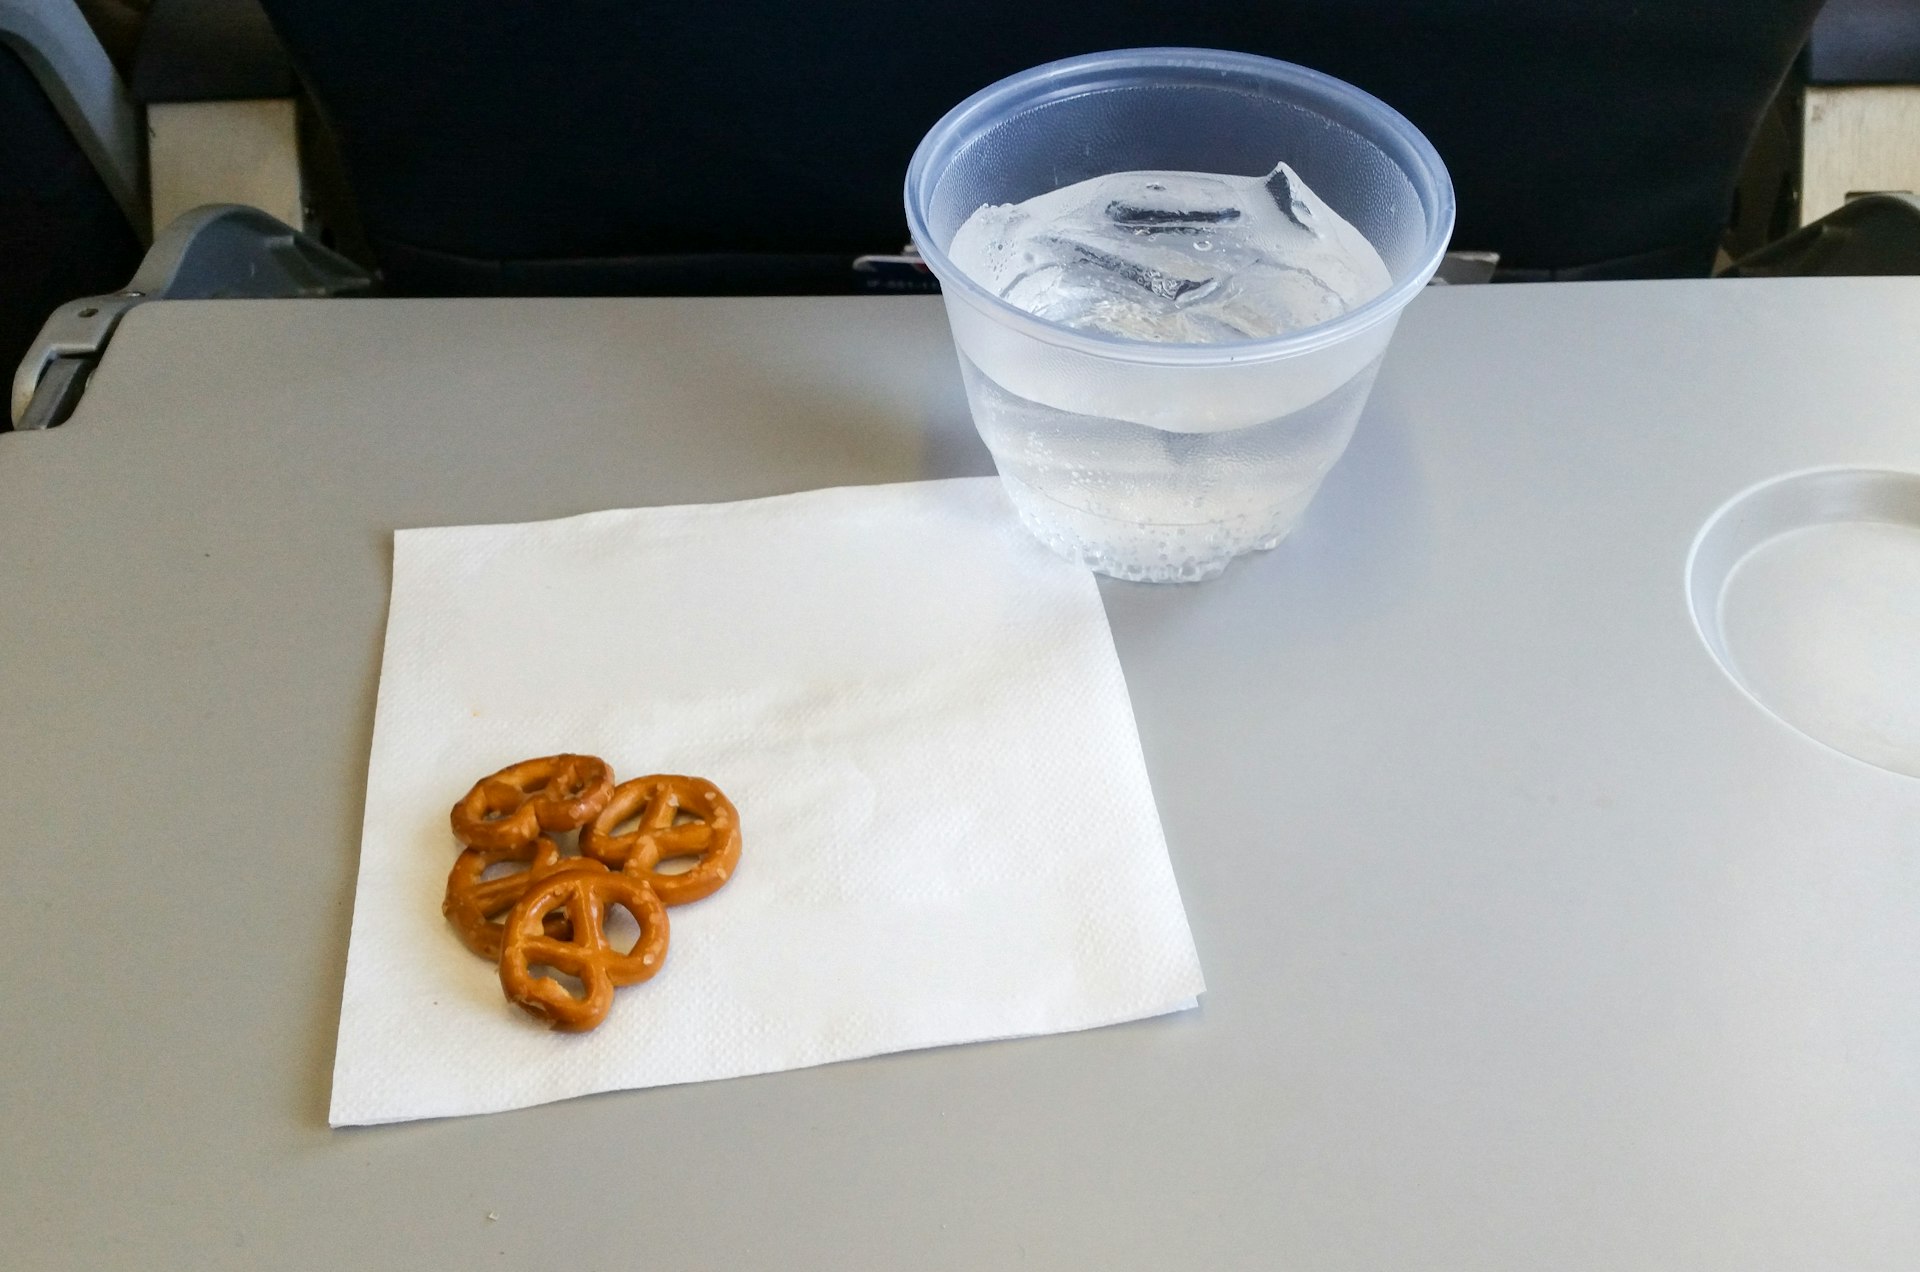 A small pile of pretzels rest on the corner of a white napkin on an airline tray. Next to the napkin is plastic cup filled with water and ice.